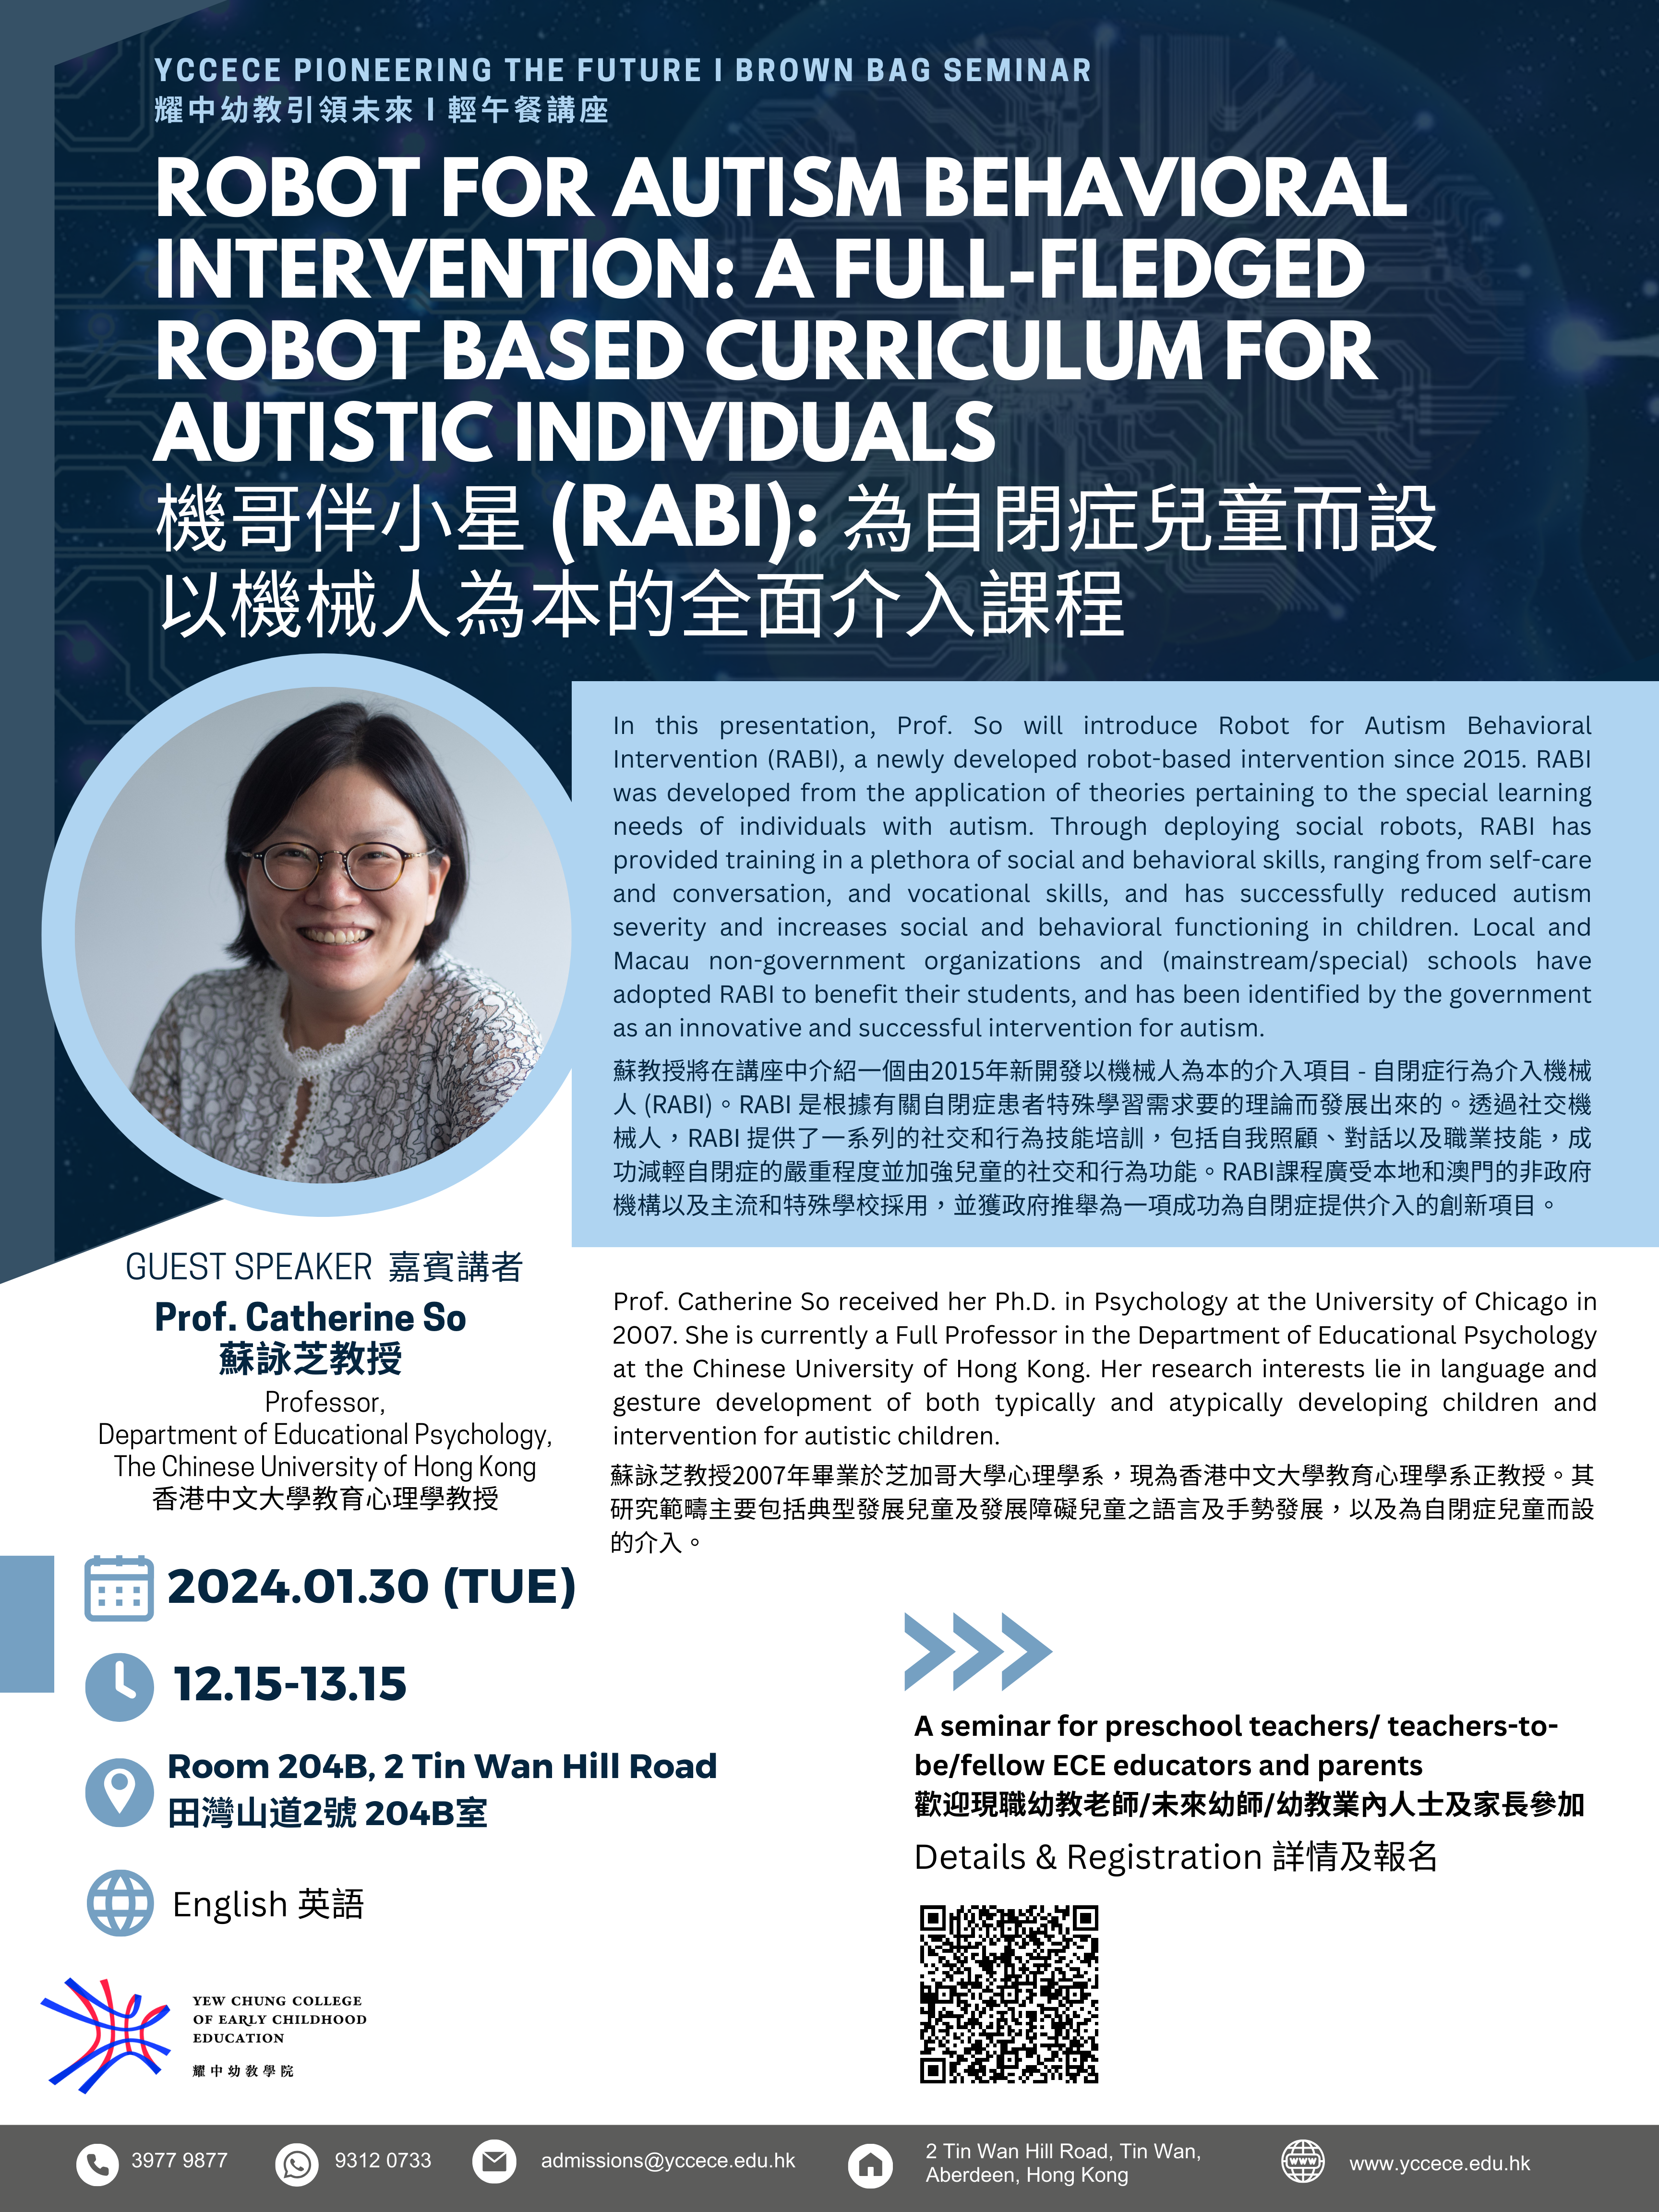 Robot for Autism Behavioral Intervention: A full-fledged robot based curriculum for autistic individuals